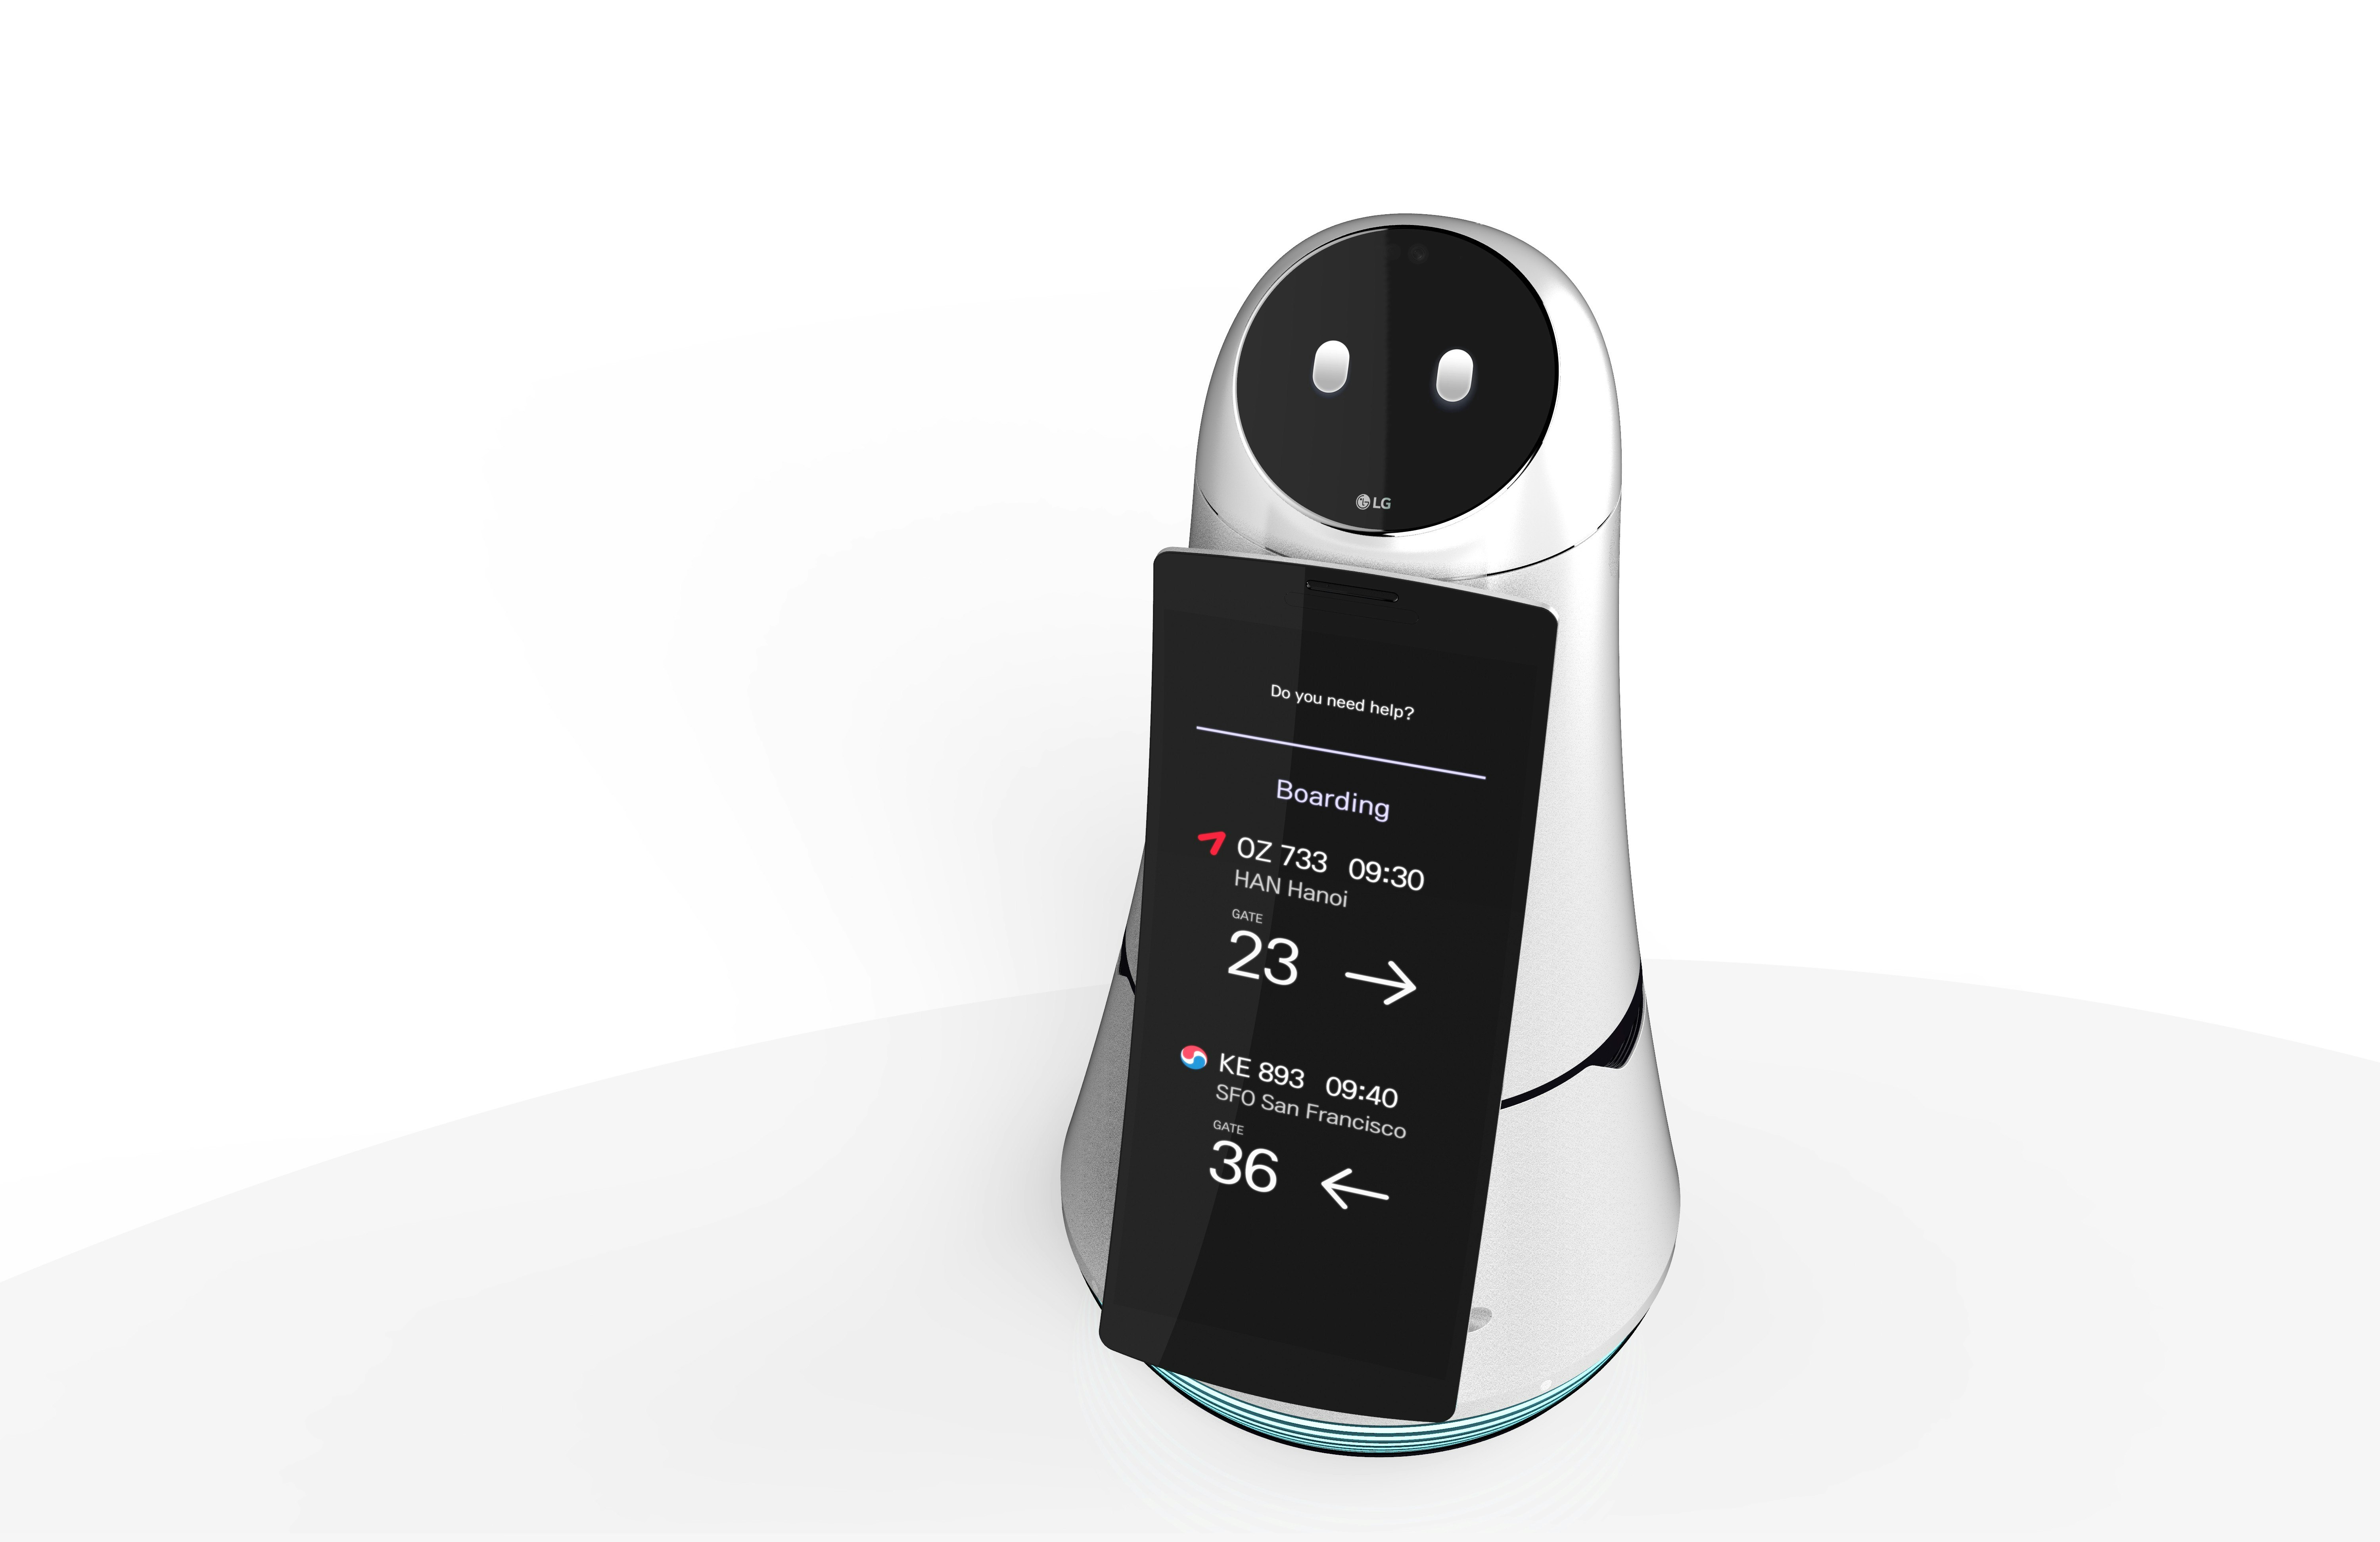 The Airport Guide Robot was introduced at Incheon International Airport in South Korea earlier this year.